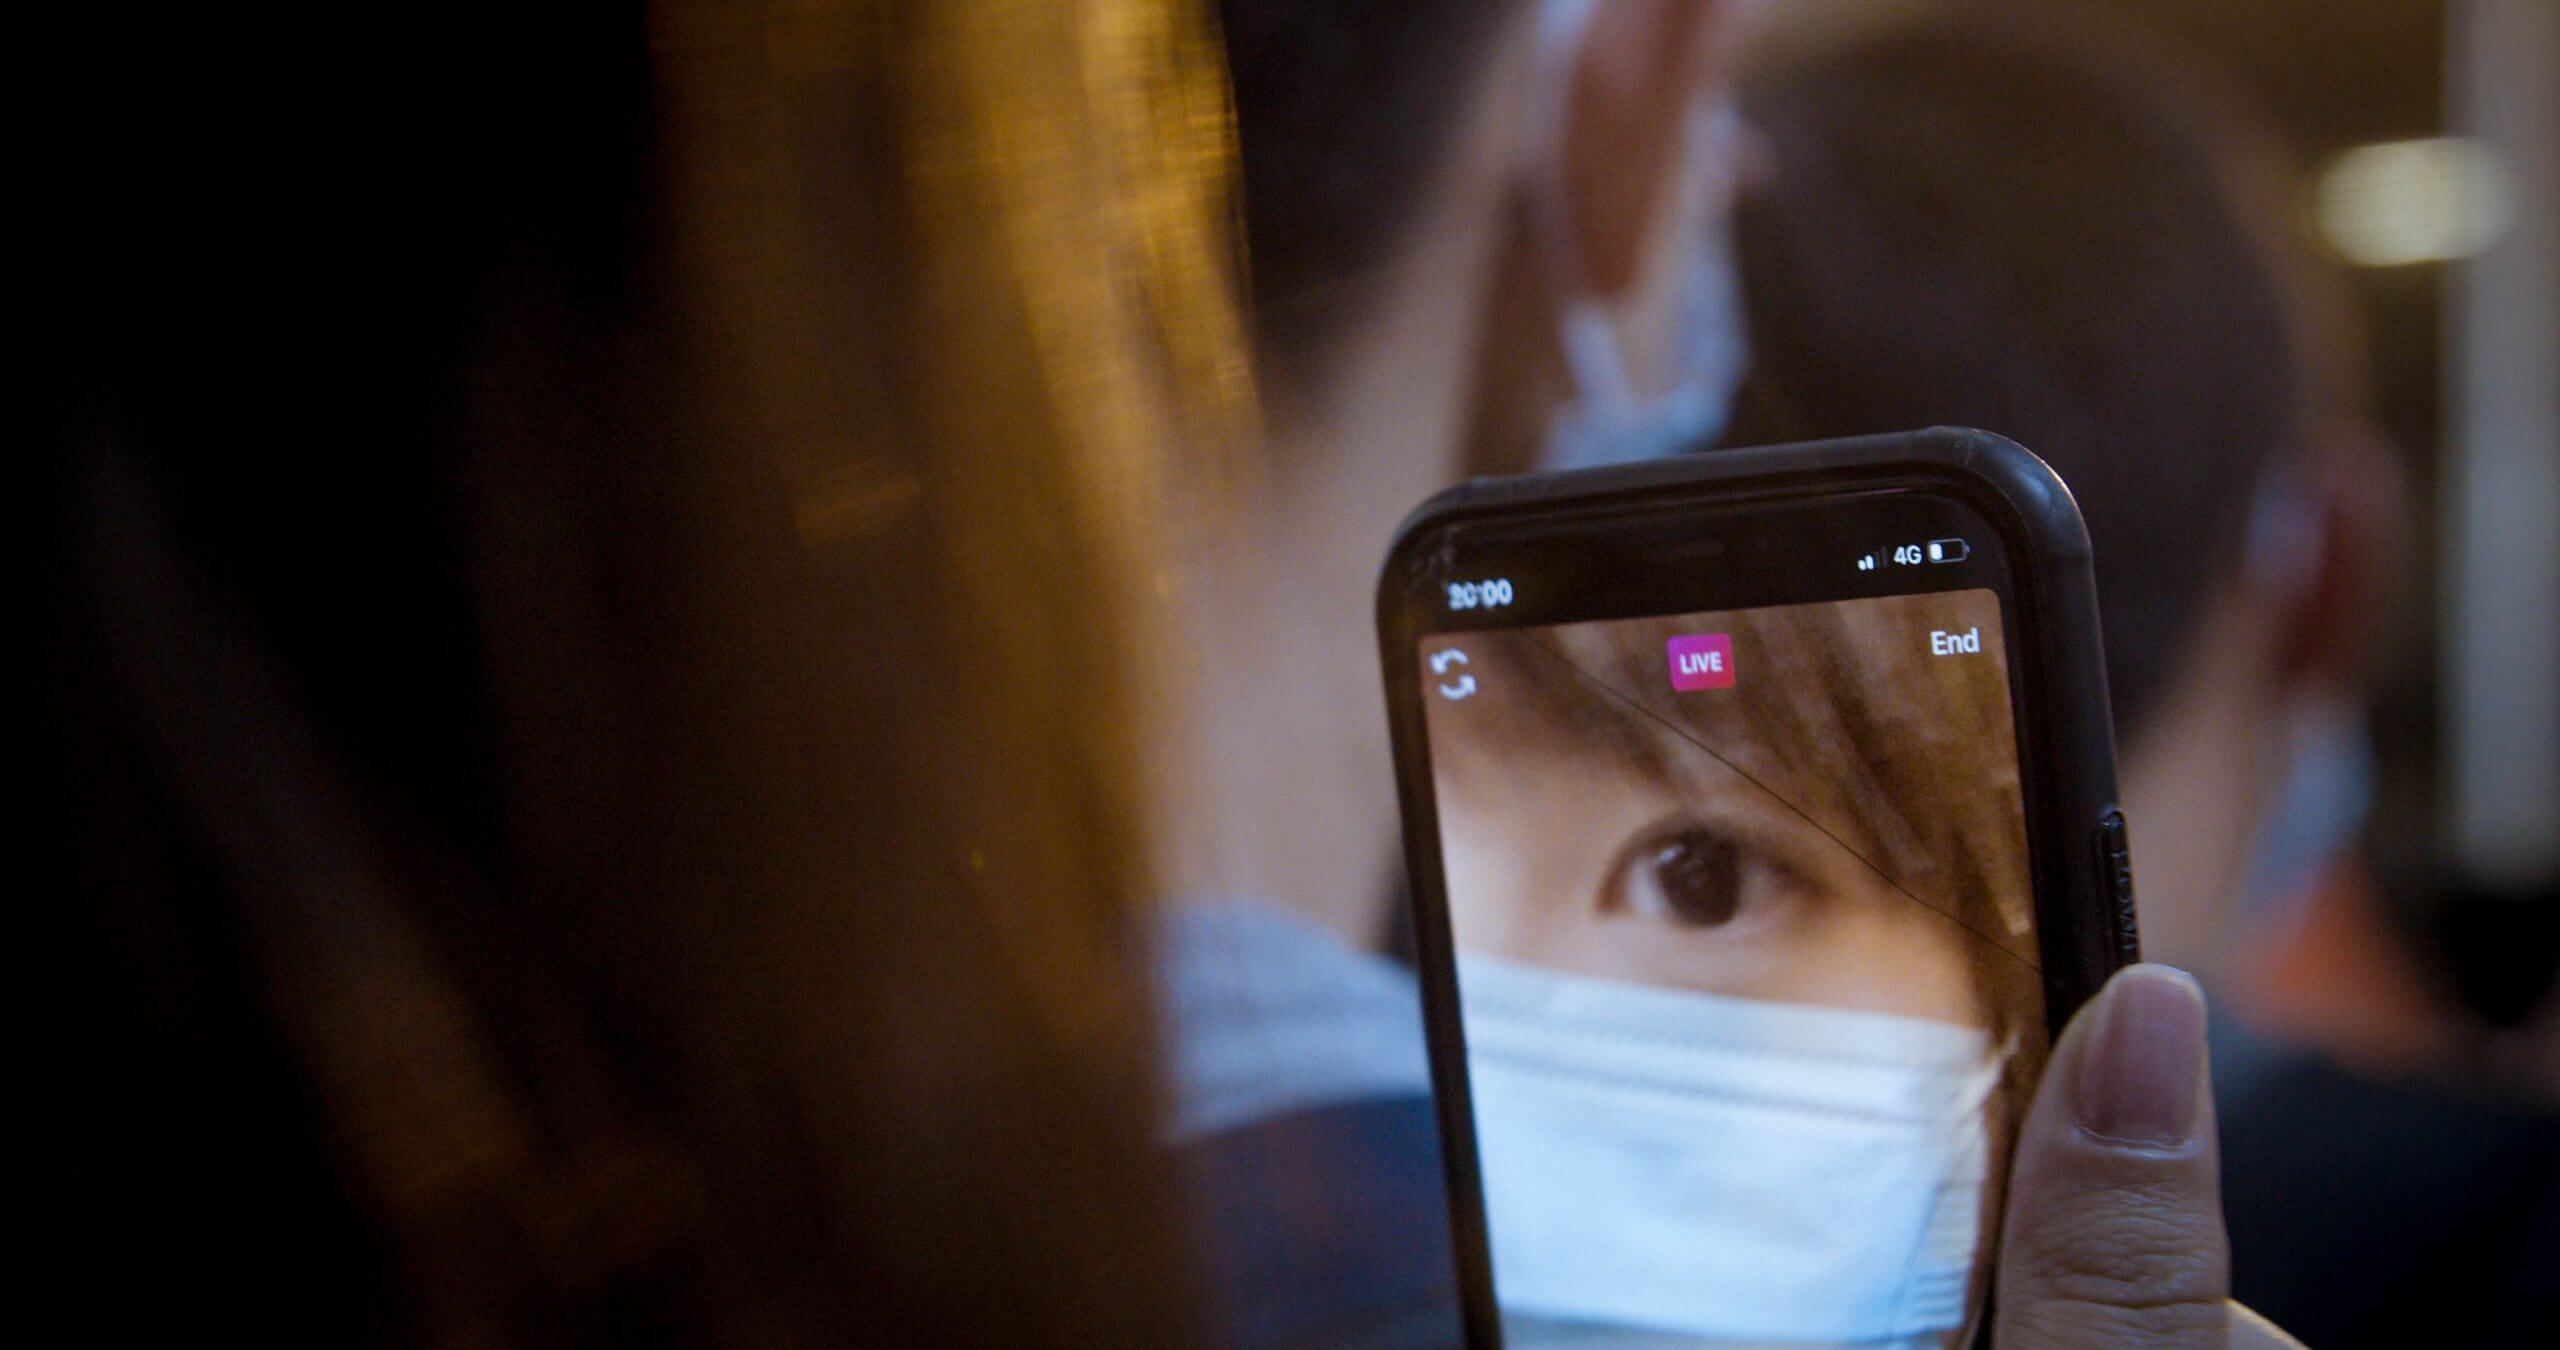 Close up to the screen of a cellphone where we can see the eye of a woman wearing a facemask